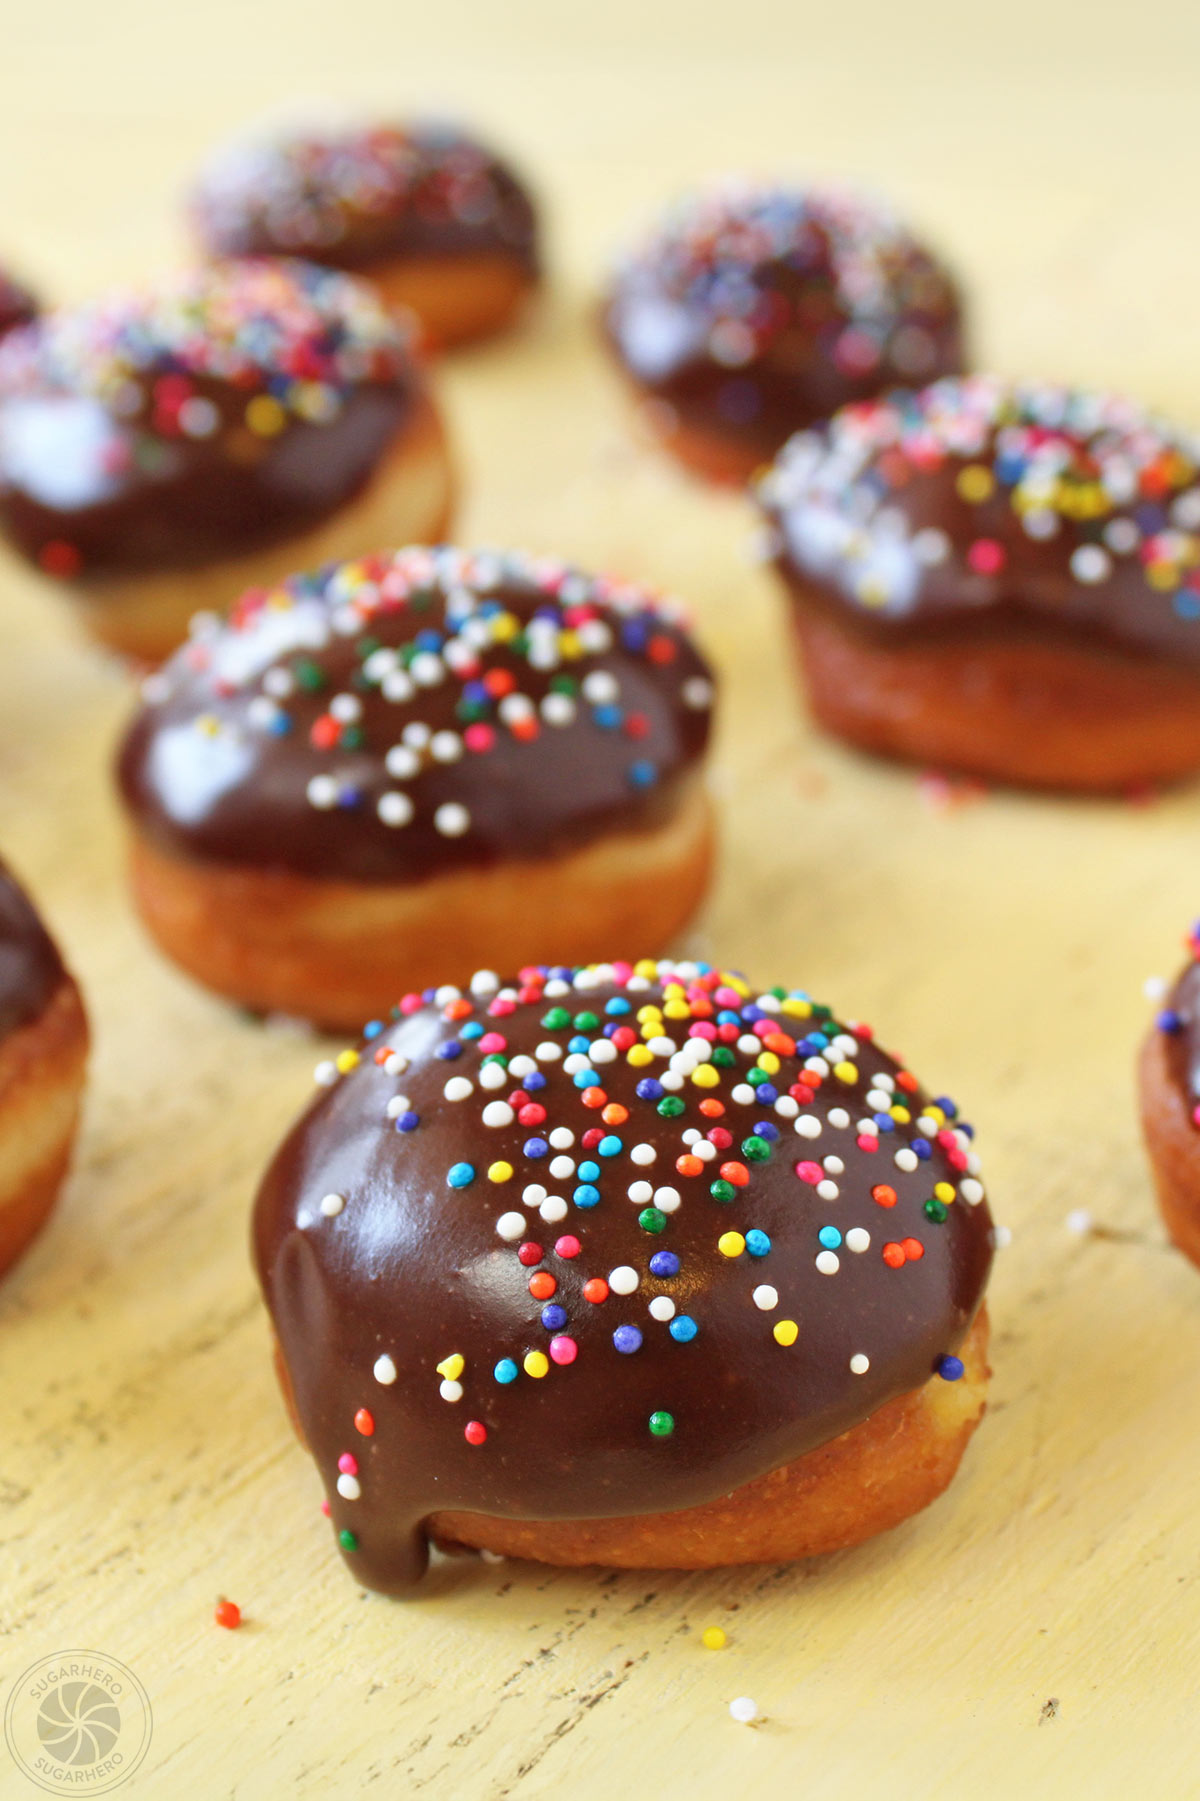 Several Easter Egg Doughnuts drying on wooden surface with multi-colored sprinkles on top.